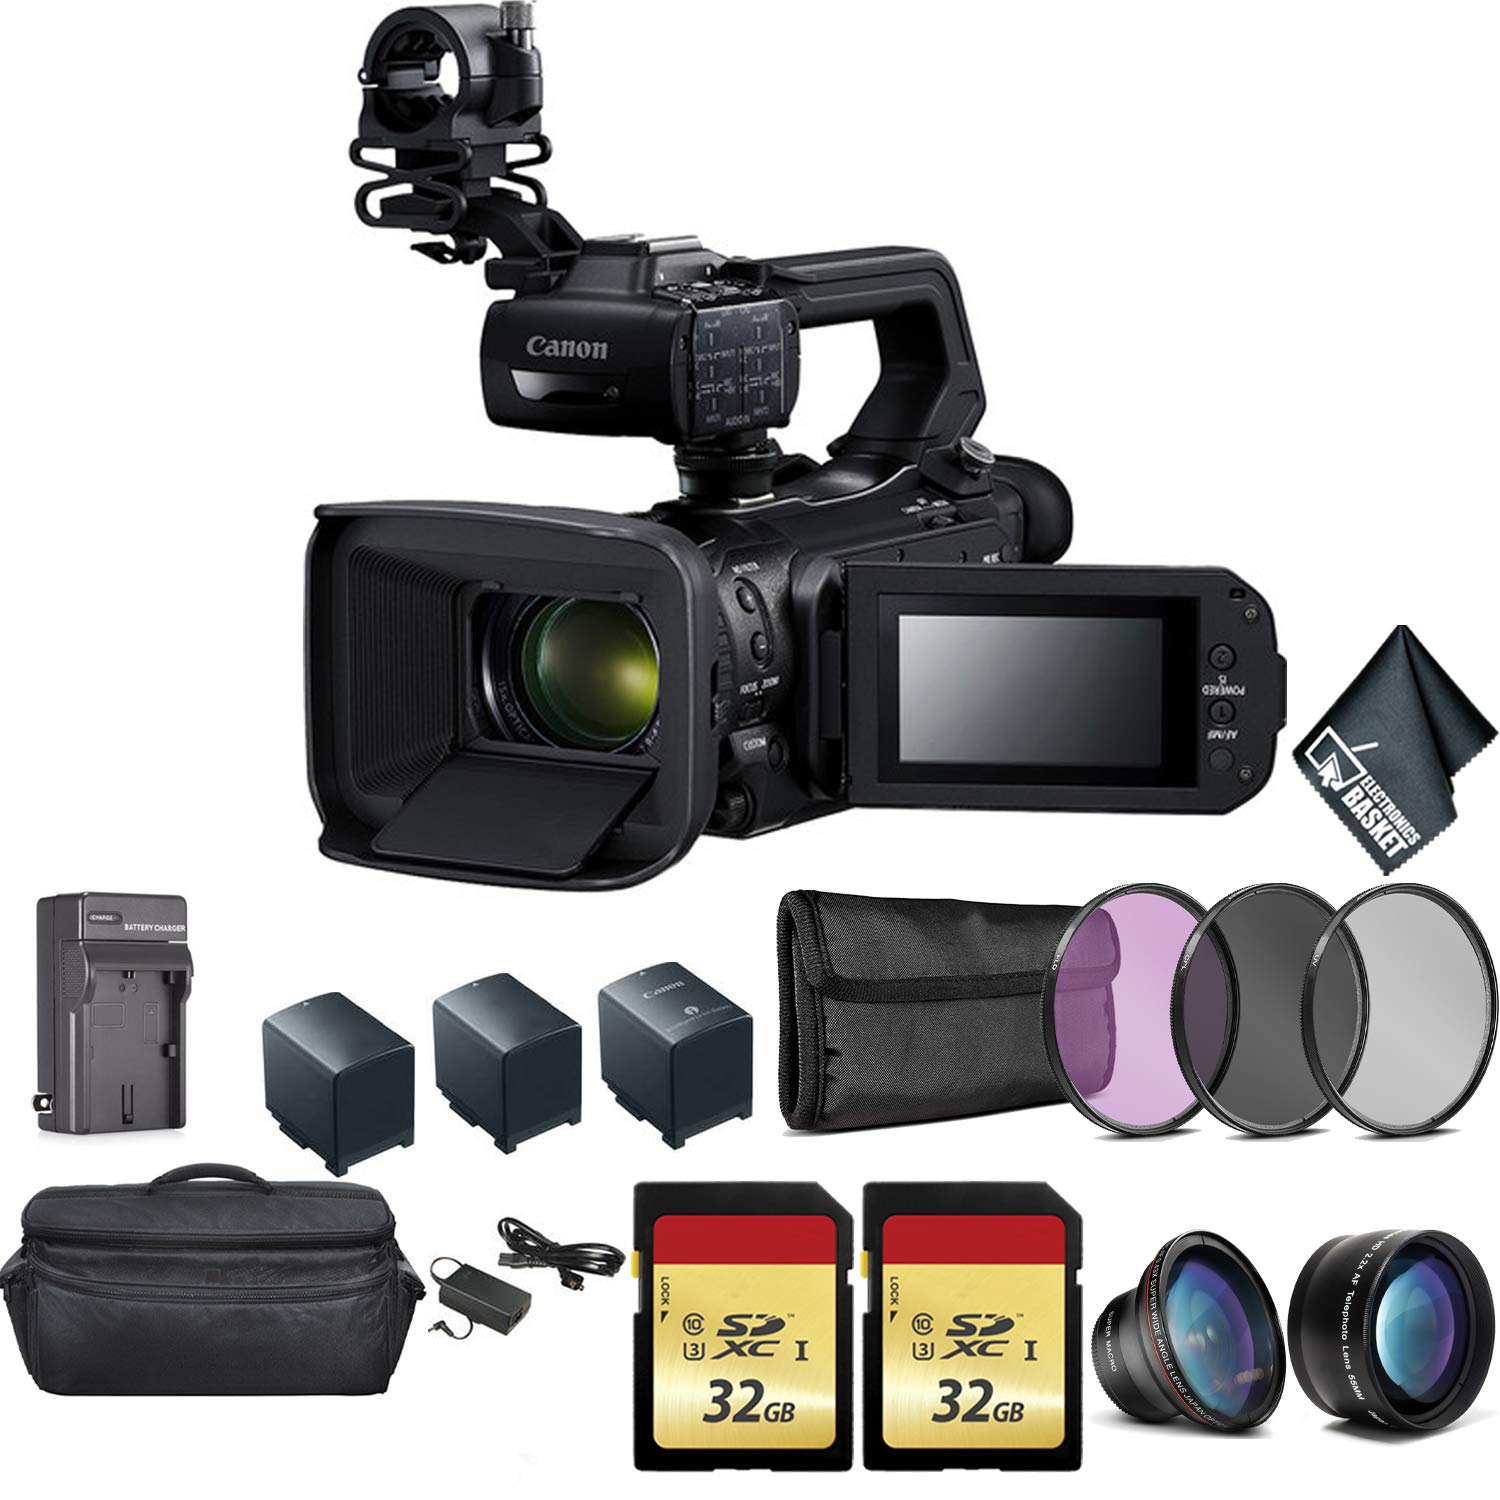 Canon XA50 Professional UHD 4K Camcorder Bundle with 2x Spare Batteries + 2x 32GB Memory Cards + Carrying Case + Filter Kit+ More